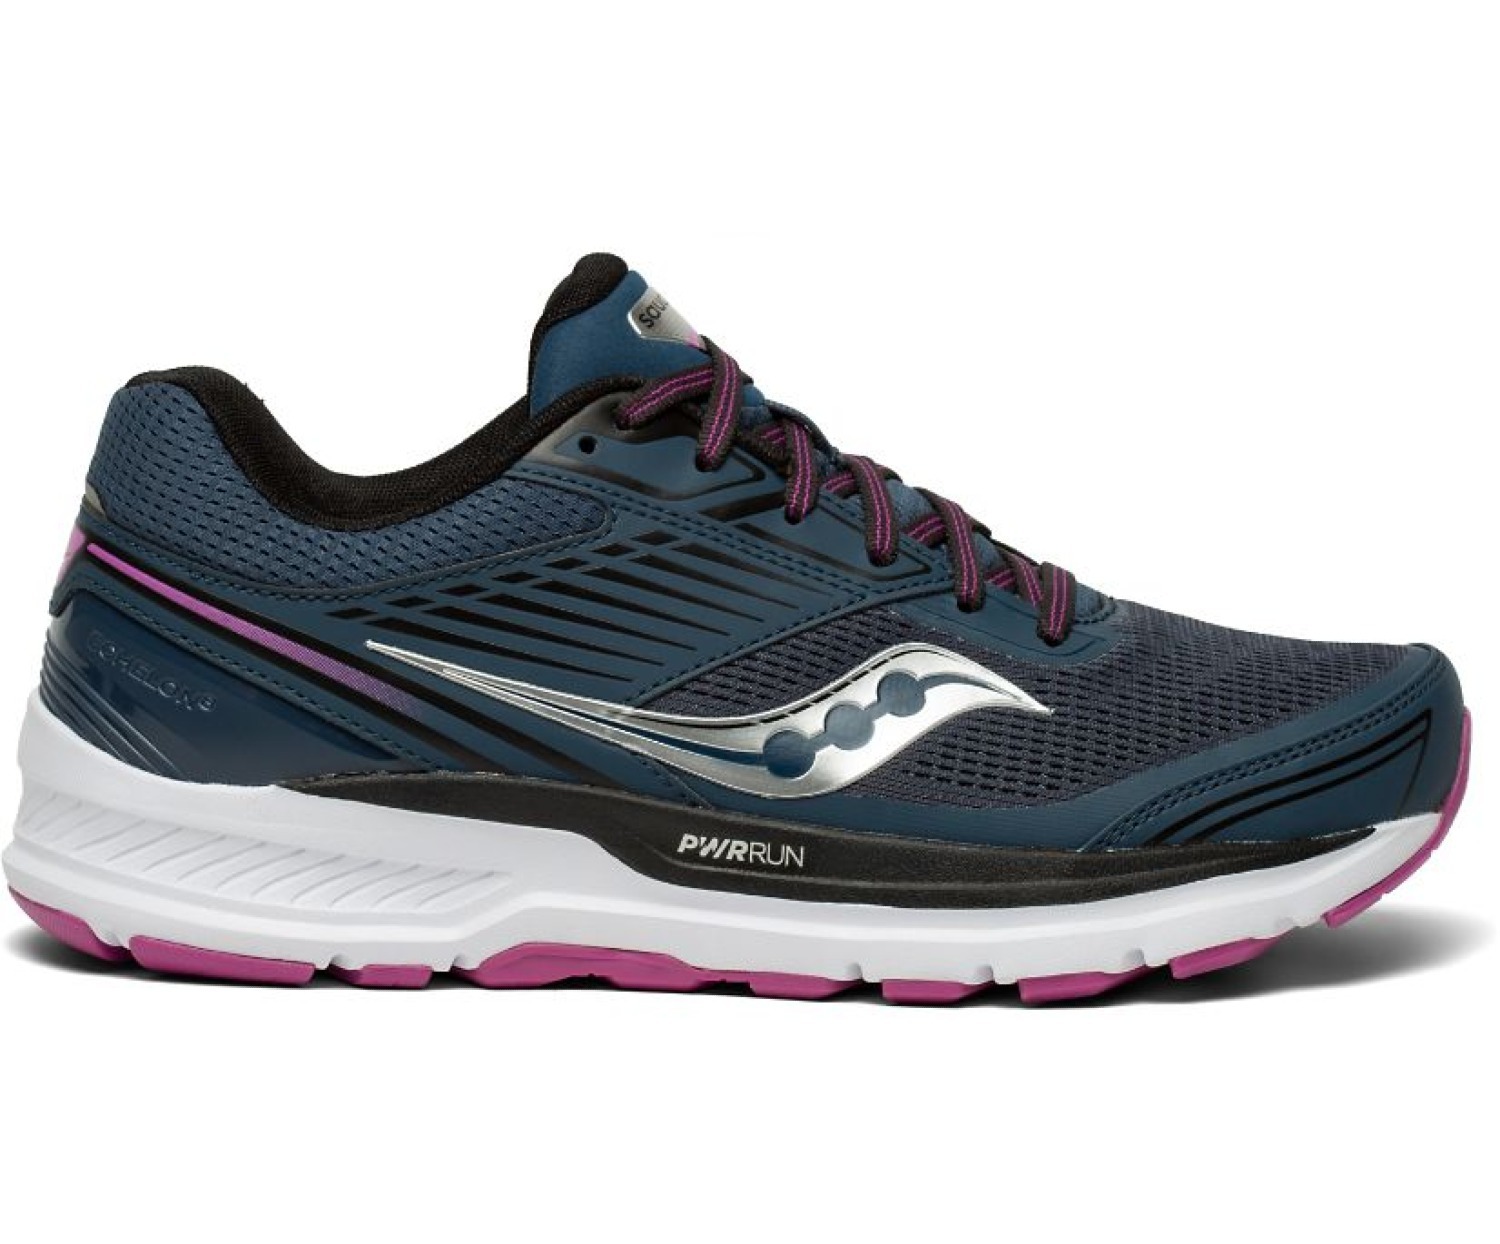 Saucony Men's or Women's Echelon 8 Running Shoes (Various Colors, Regular or Wide) $65 + Free Shipping on Orders $100+